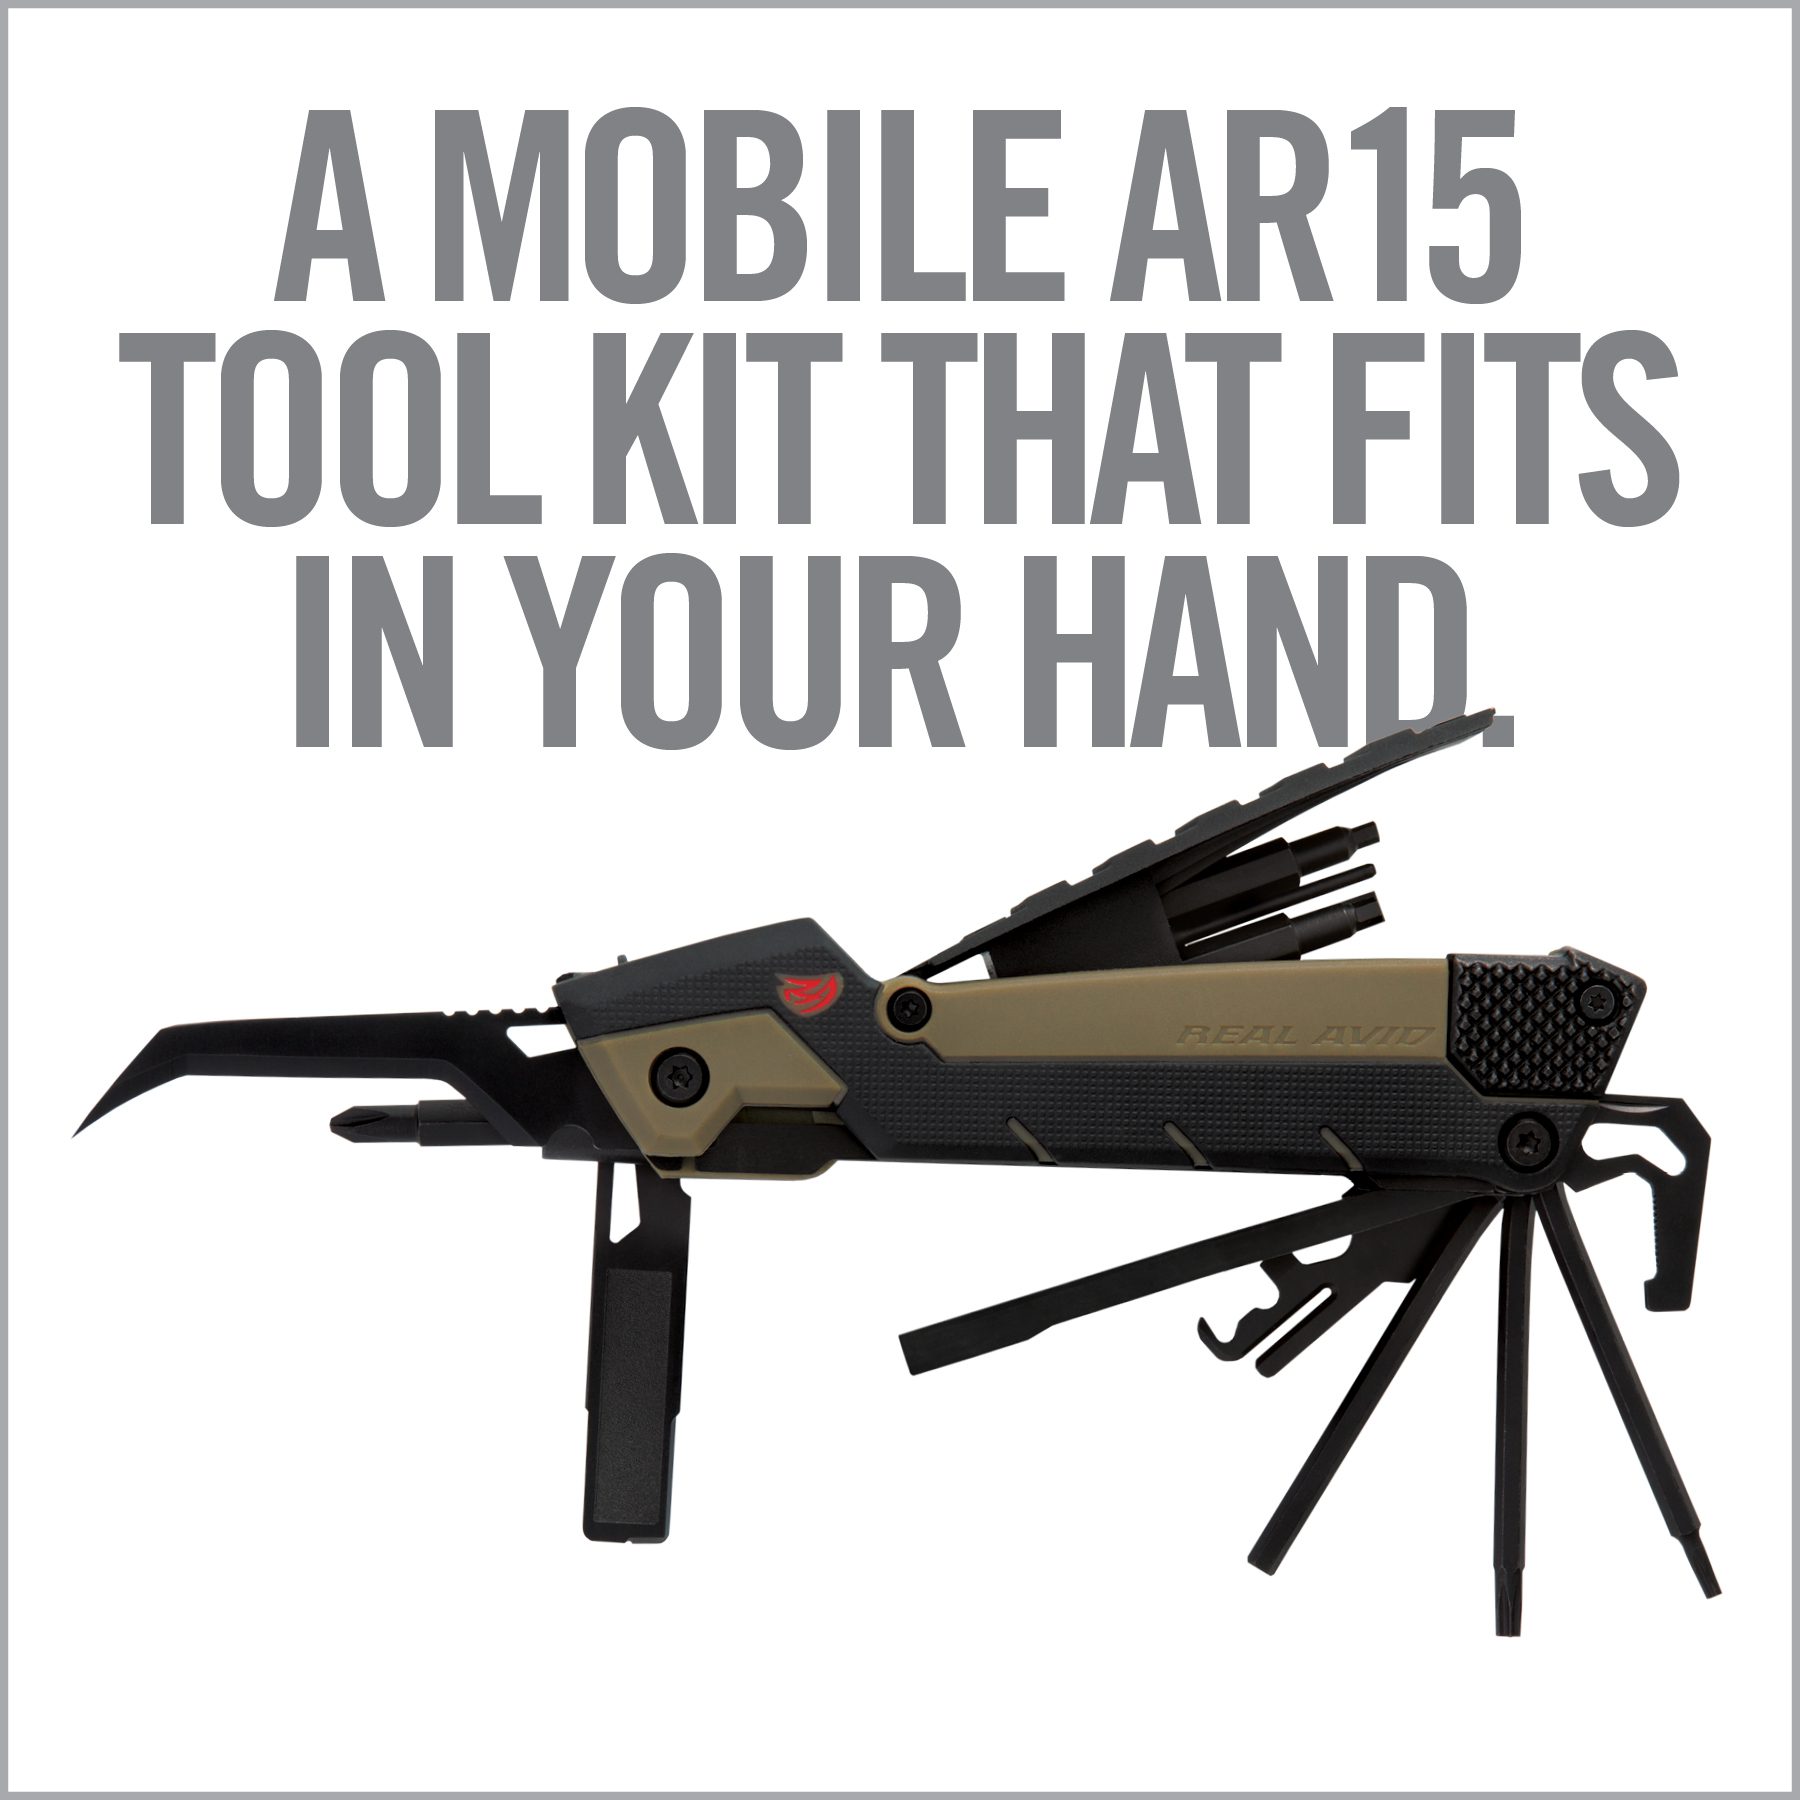 an advertisement for a tool kit that fits in your hand